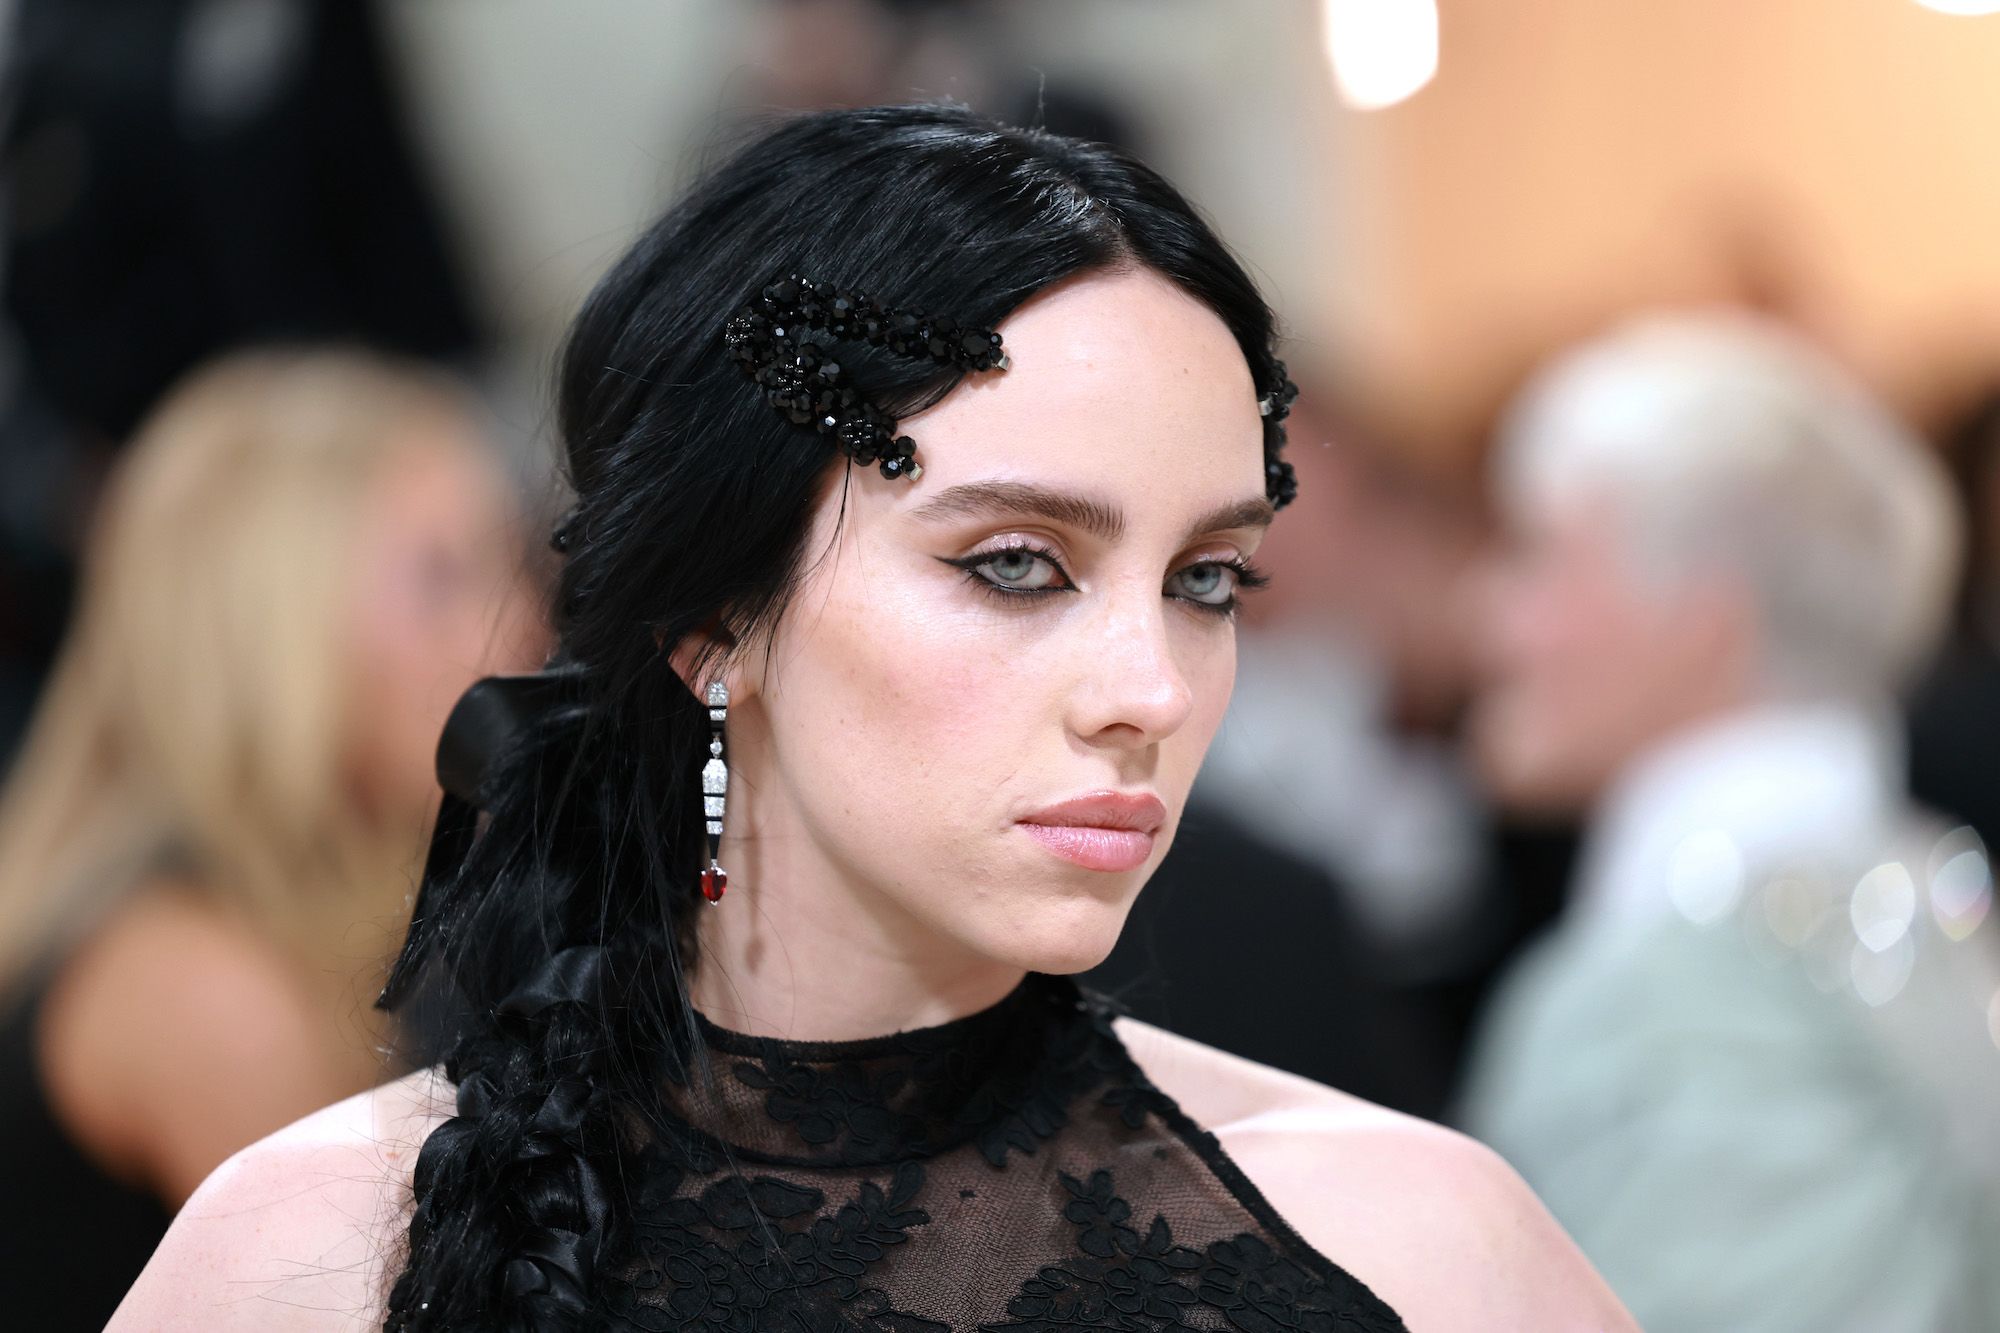 'I’ve been in love with girls for my whole life' - Billie Eilish opens up on sexuality